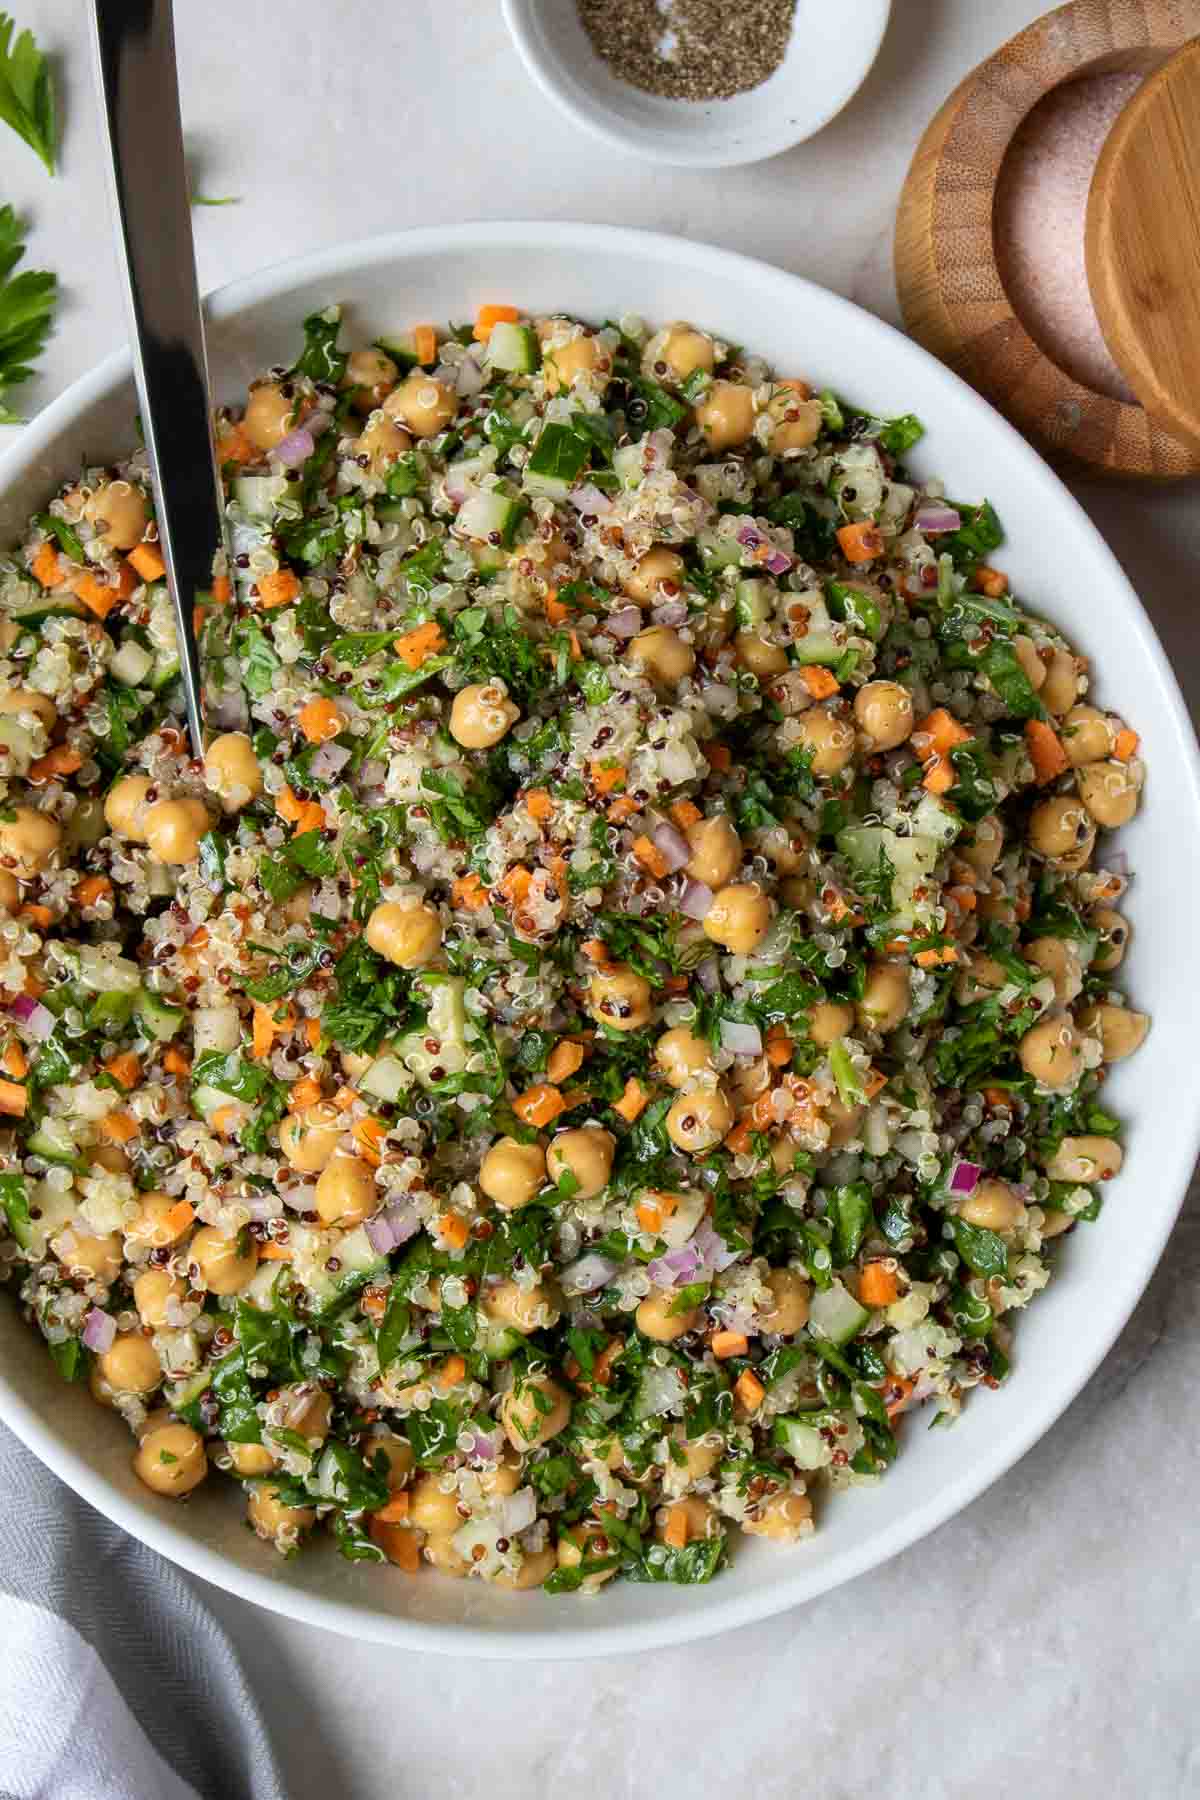 Quinoa chickpea salad in a white bowl with a silver spoon and a side of salt and pepper.